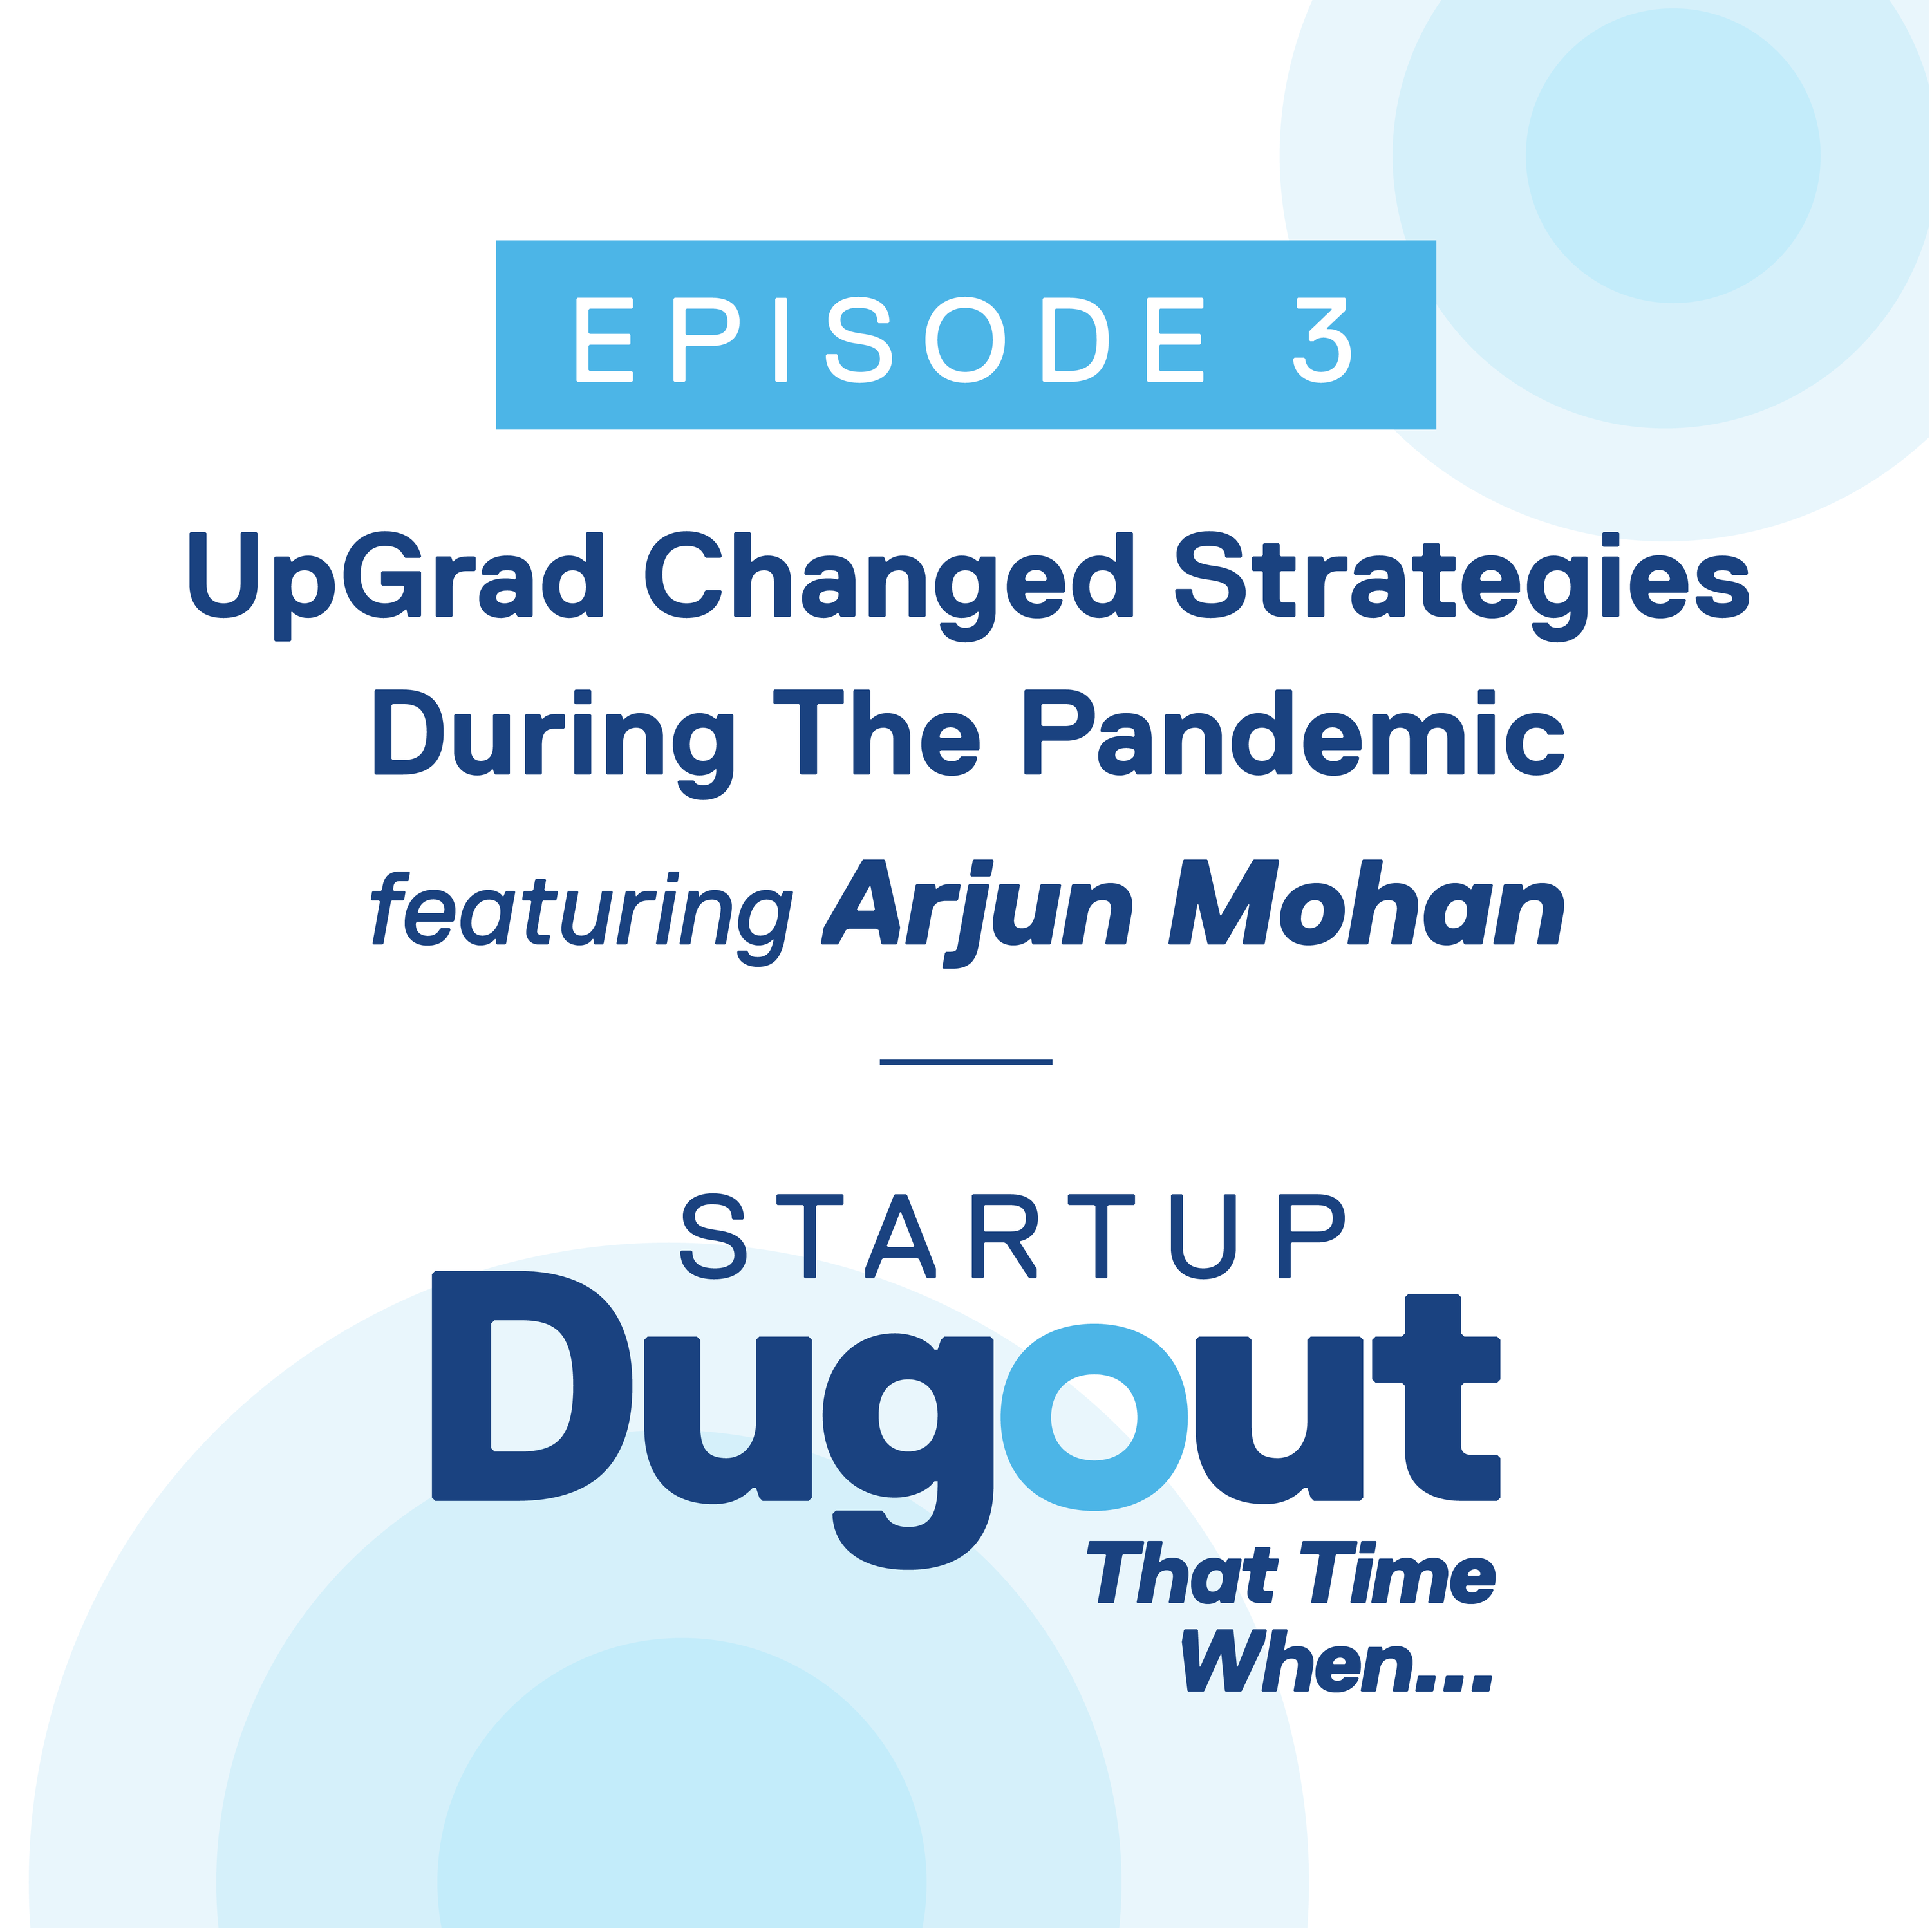 UpGrad changed strategies during the Pandemic ft. Arjun Mohan